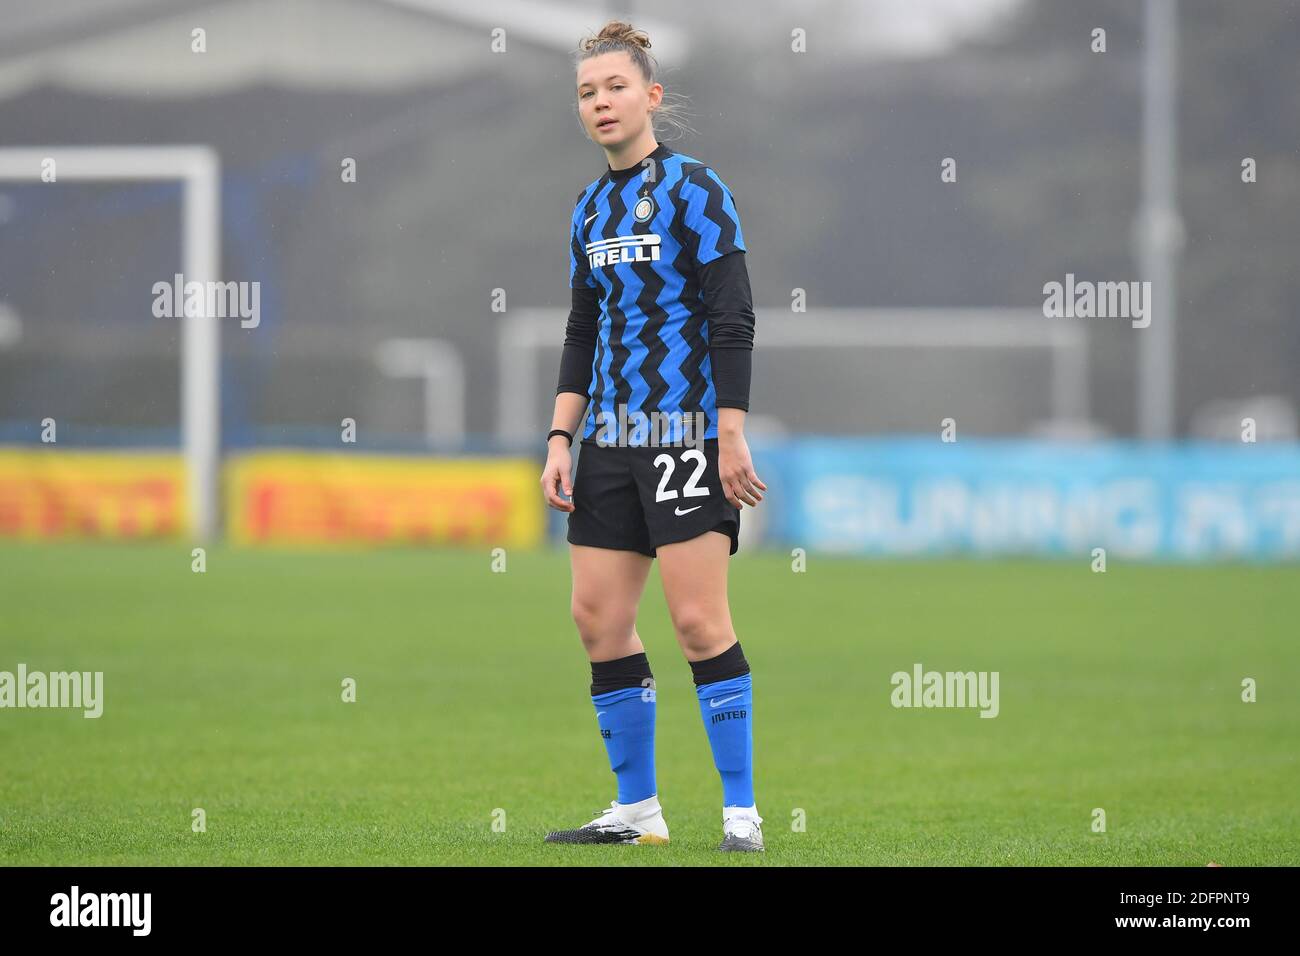 Milano, Italia. 06th Dec, 2020. Anna Catelli (#22 Inter) during the Serie A  women's match between FC Inter and San Marino Academy Cristiano Mazzi/SPP  Credit: SPP Sport Press Photo. /Alamy Live News